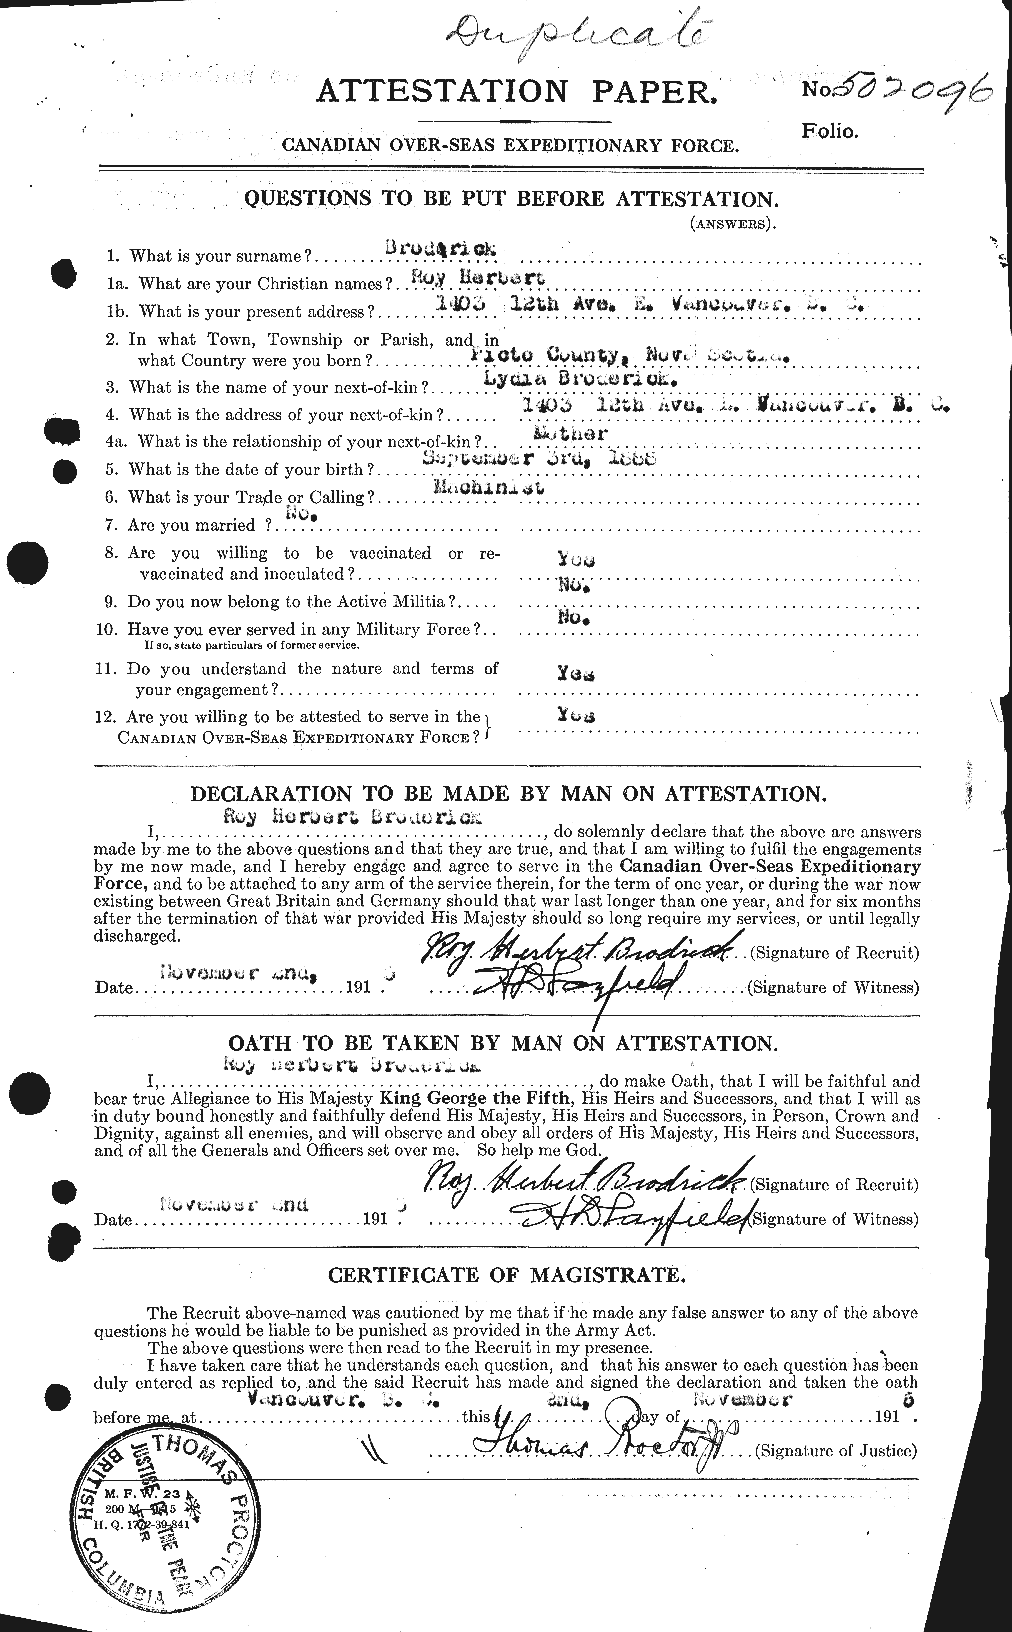 Personnel Records of the First World War - CEF 260992a